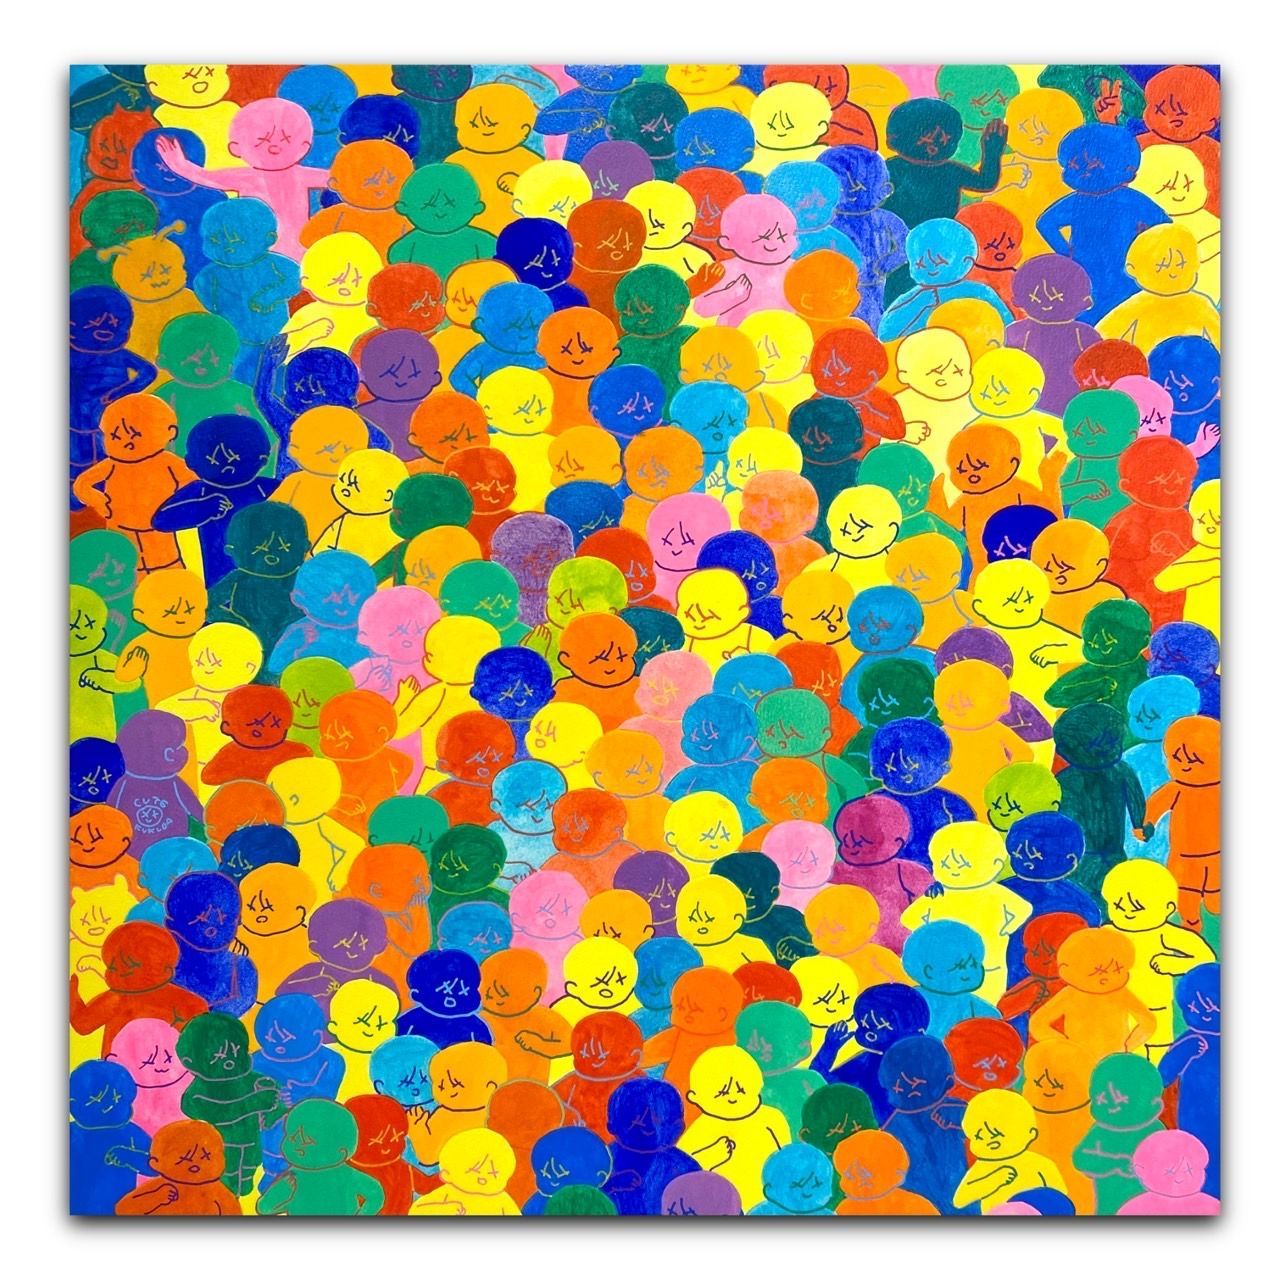 Painting by Japanese artist Cute Fukuda. It depicts numerous characters with diverse attitudes against each other. This highly colorful work is part of a series dedicated to human relationships and interactions, a theme dear to the artist.